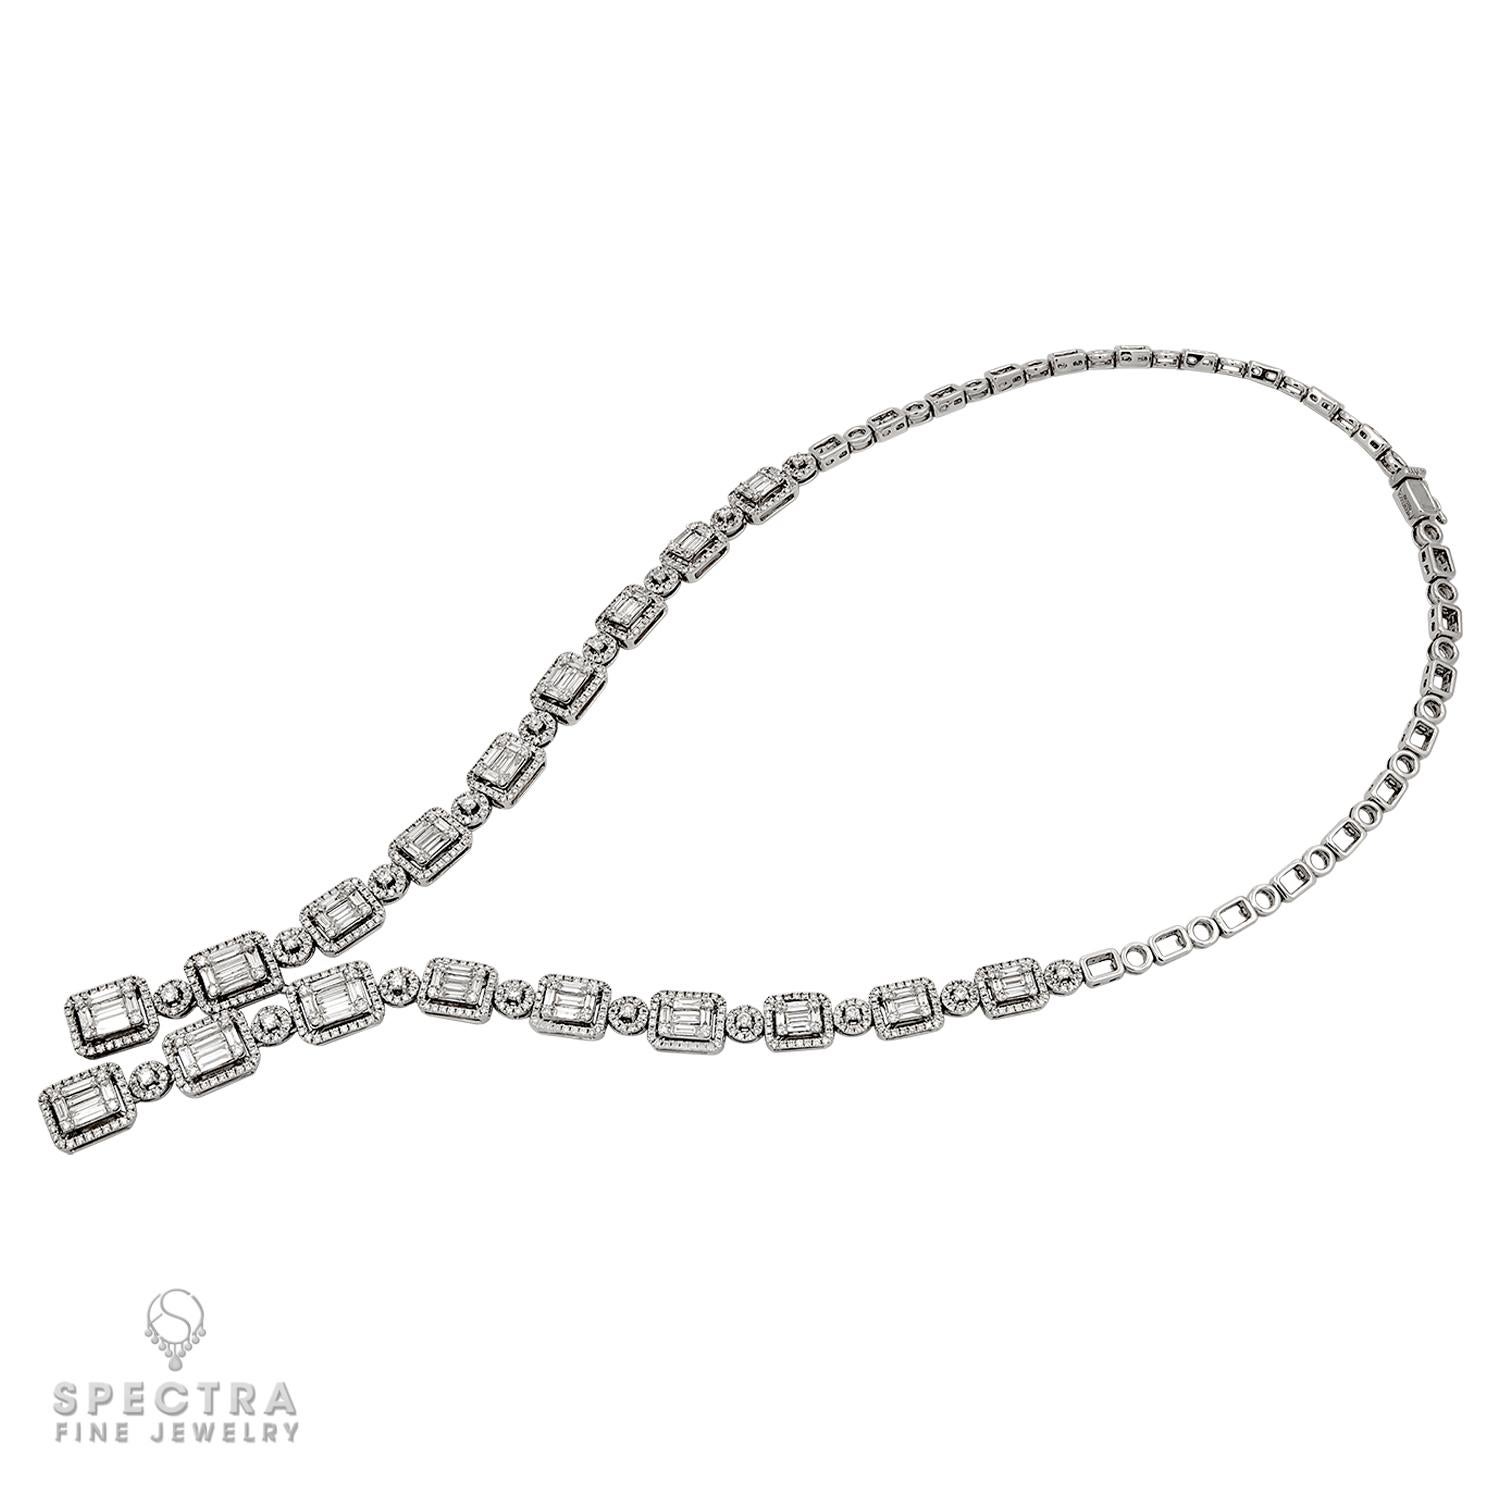 Modern Spectra Fine Jewelry Invisibly-set Diamond Necklace For Sale